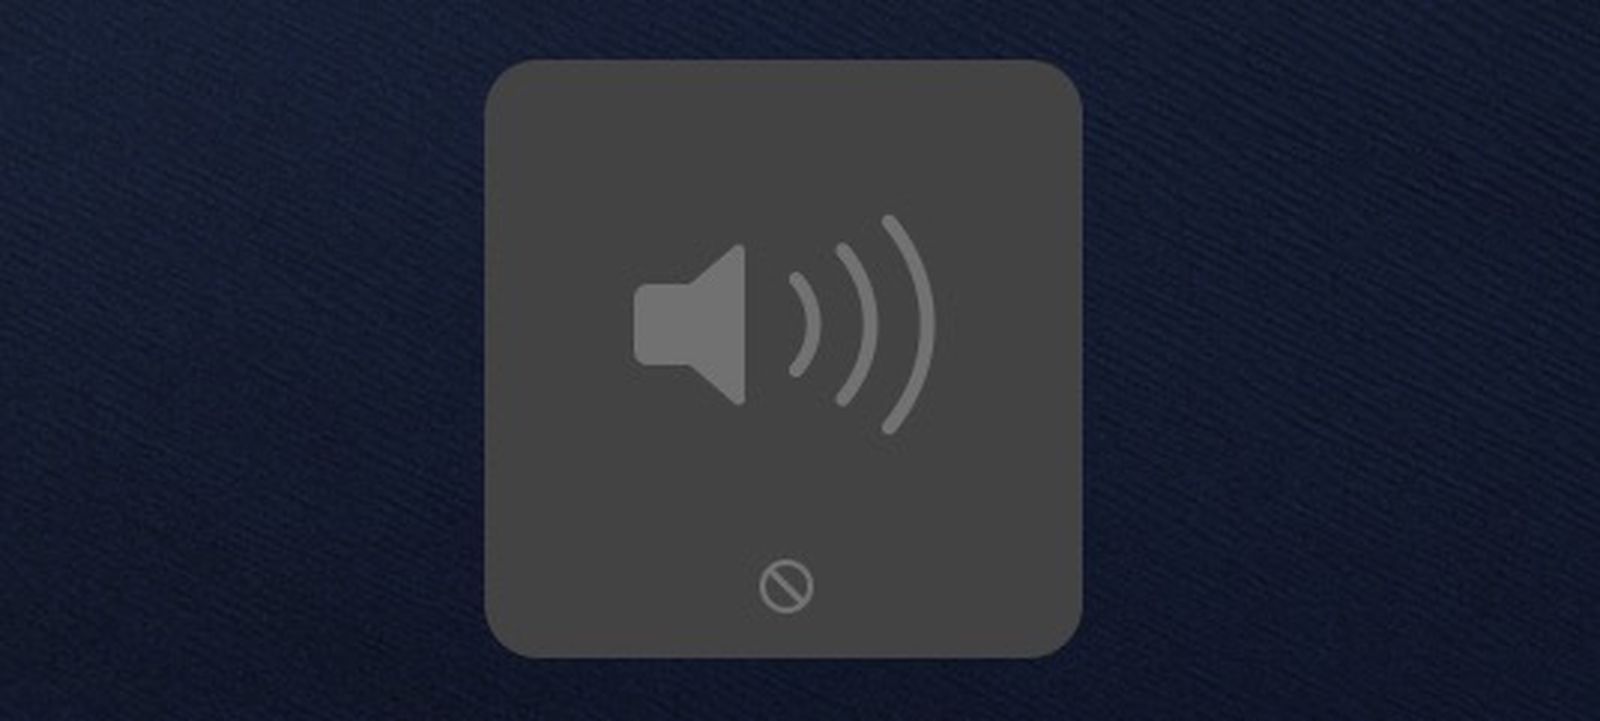 mac volume control for certain apps